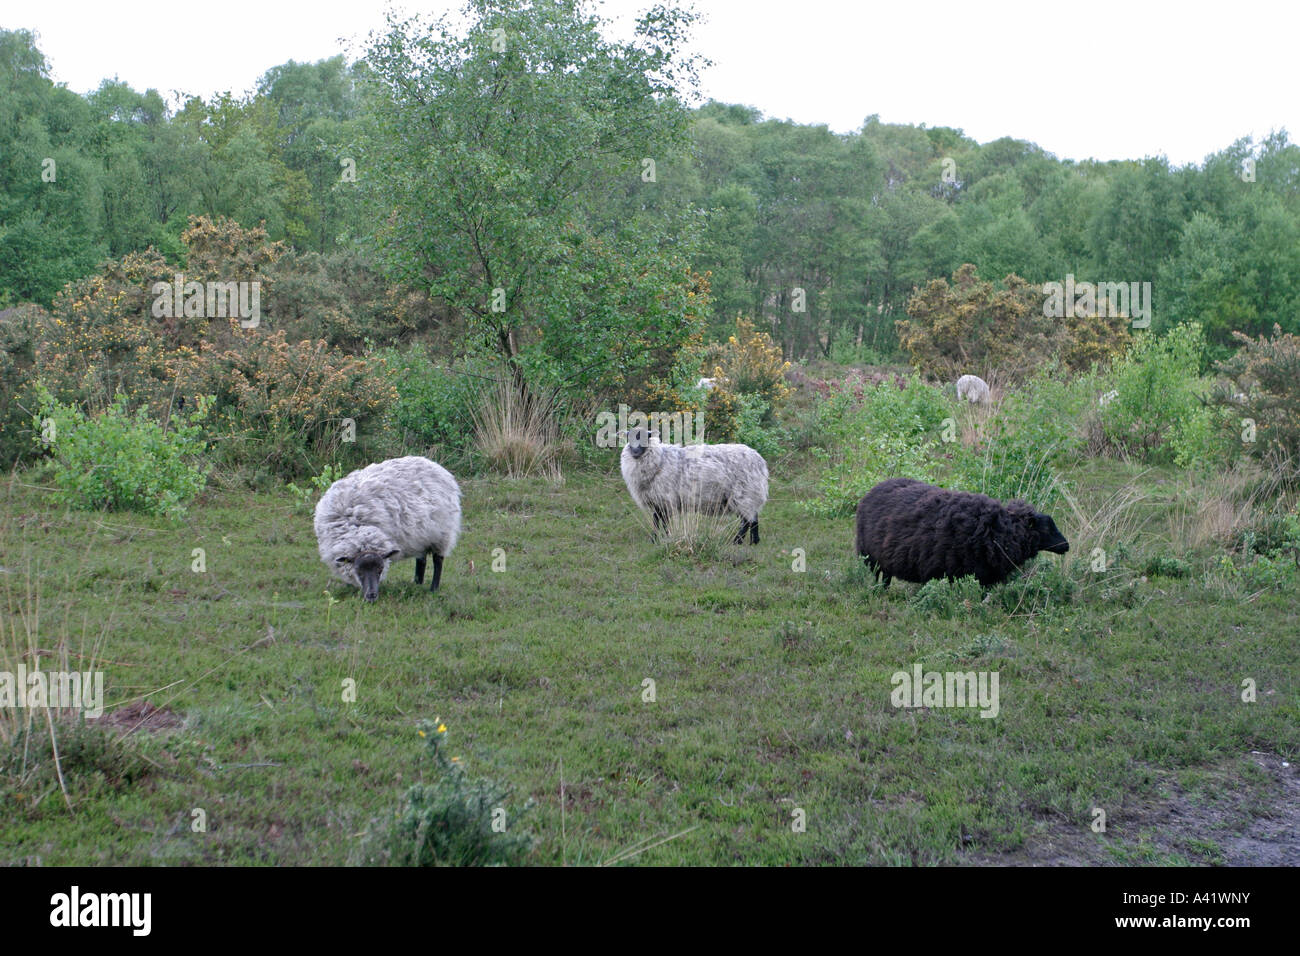 SHEEP GRAZING HEATHLAND FOR CONSERVATION Stock Photo